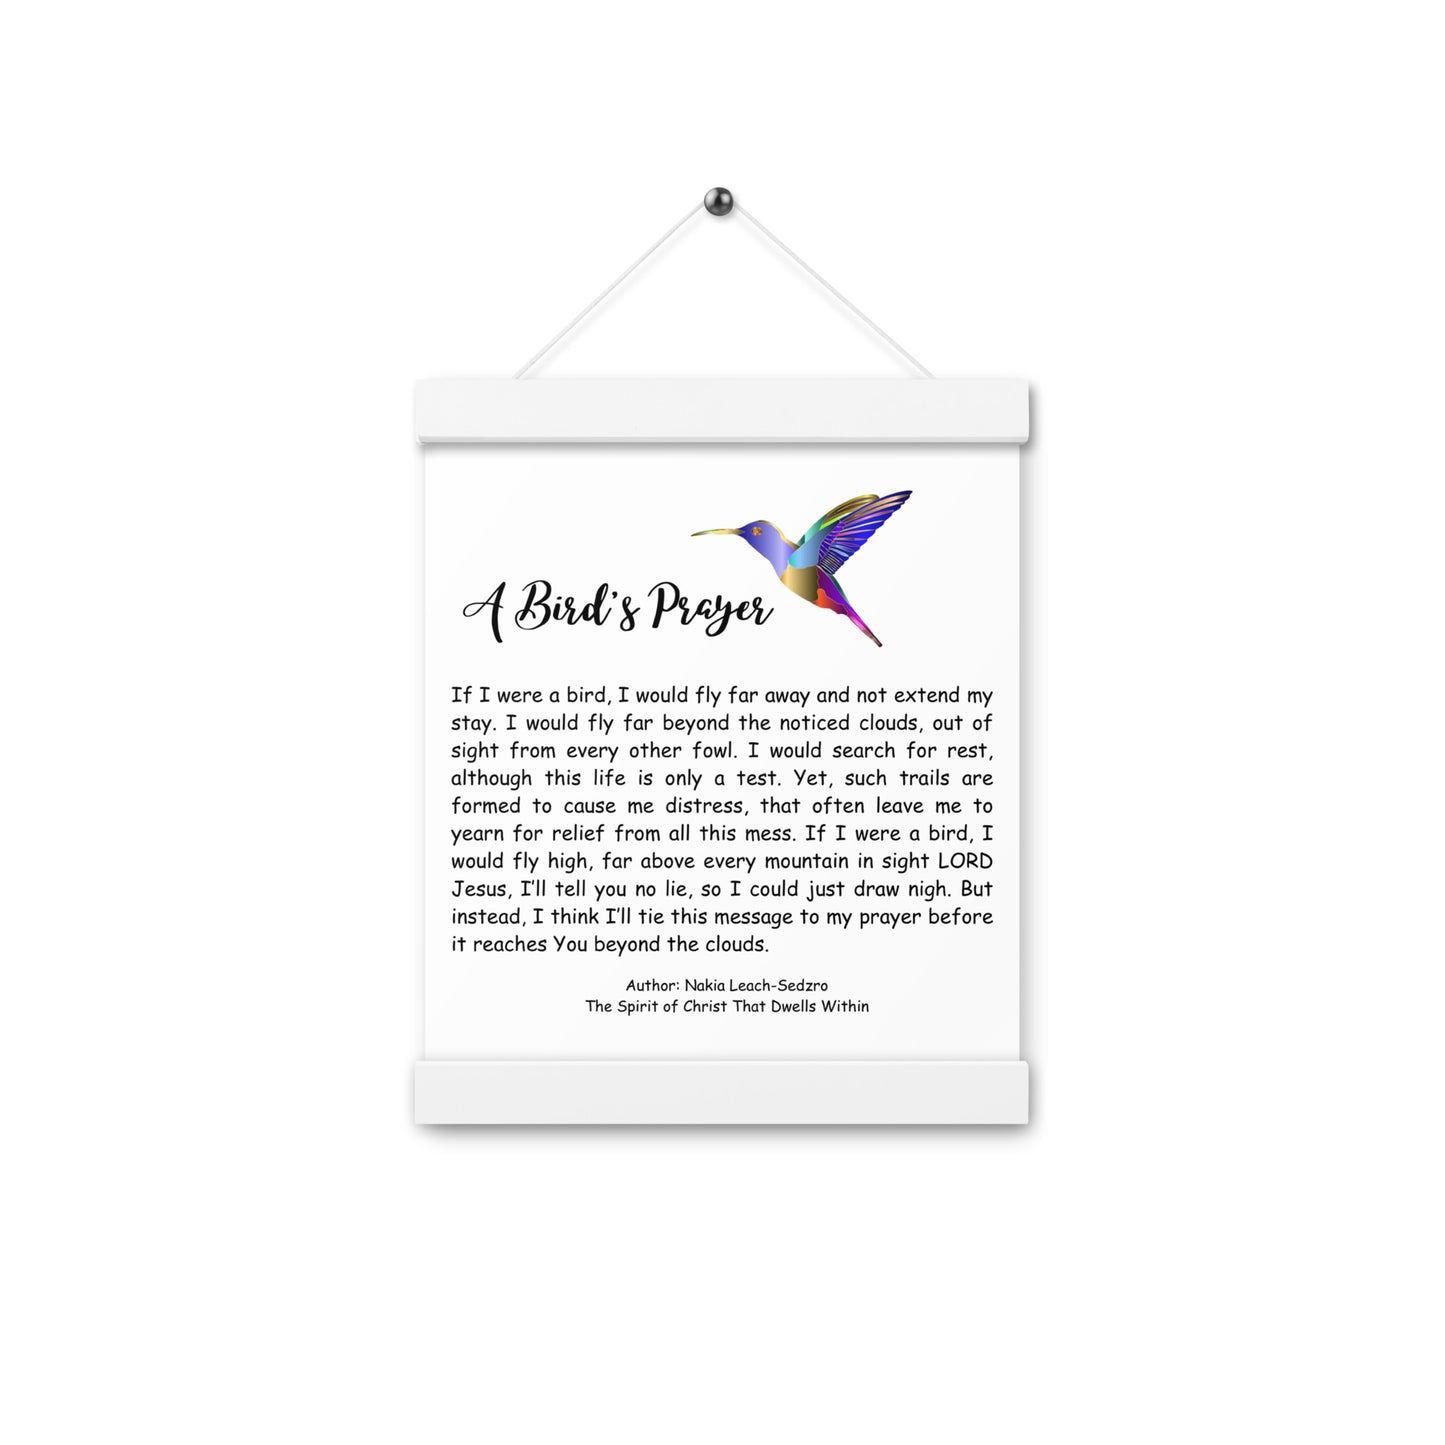 By Faith "A Bird's Prayer" Poem Poster With Hangers